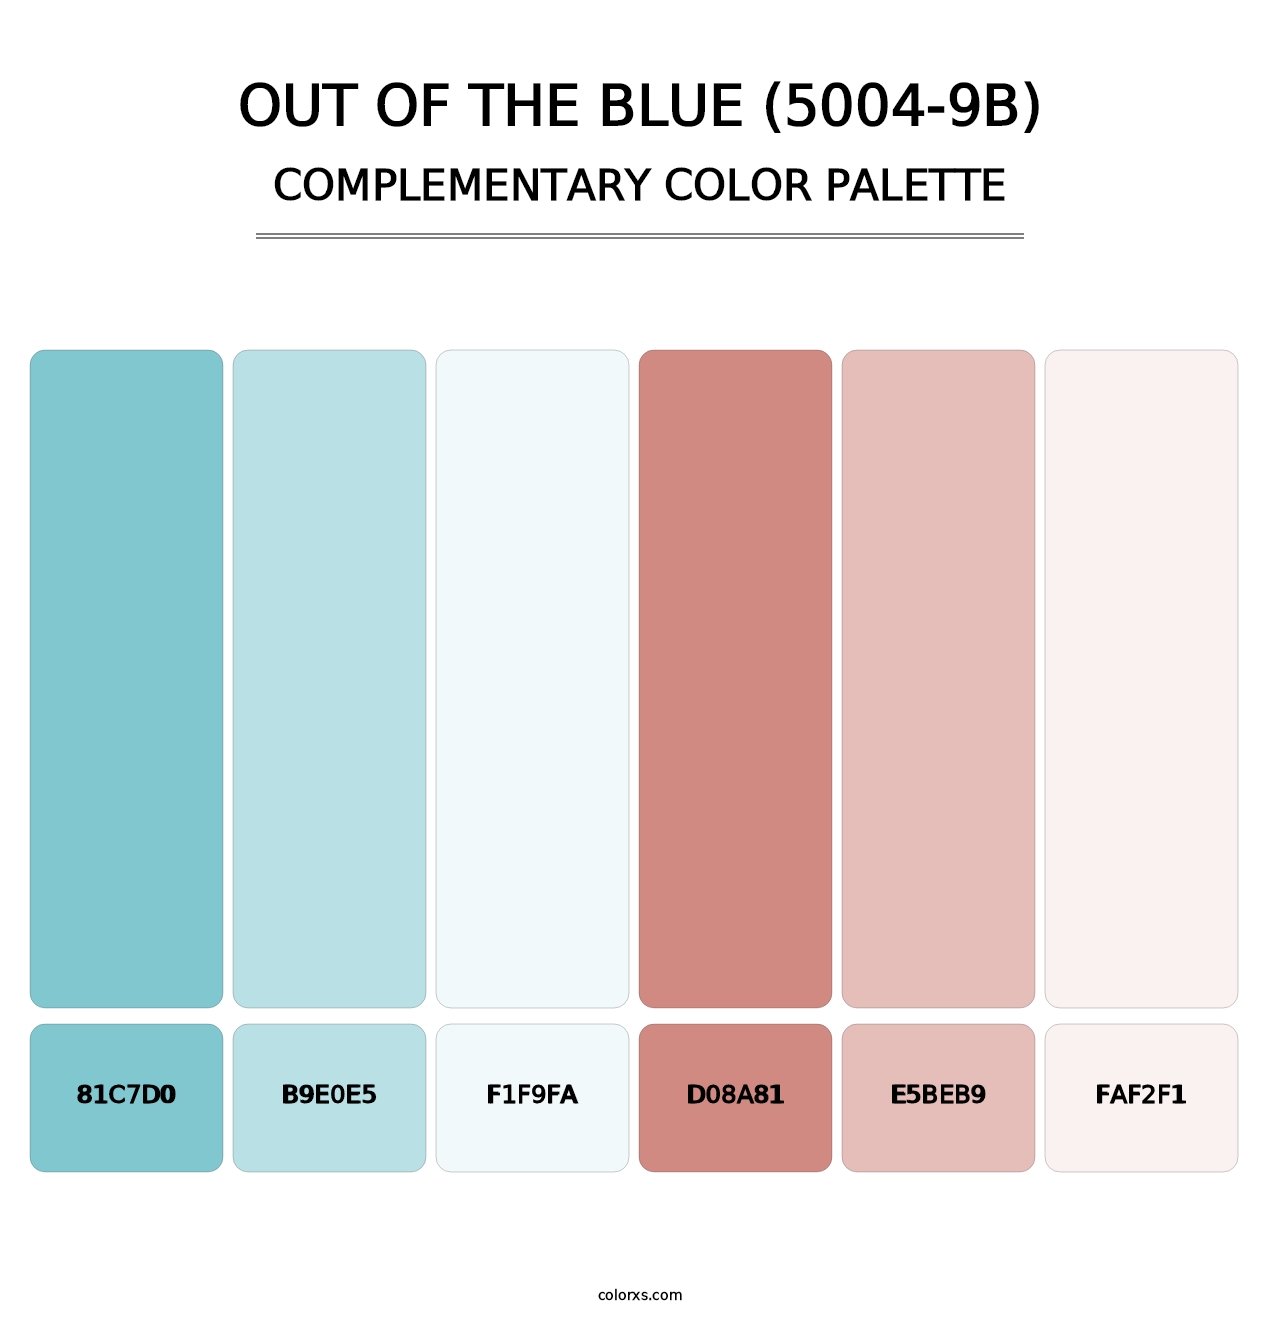 Out of the Blue (5004-9B) - Complementary Color Palette